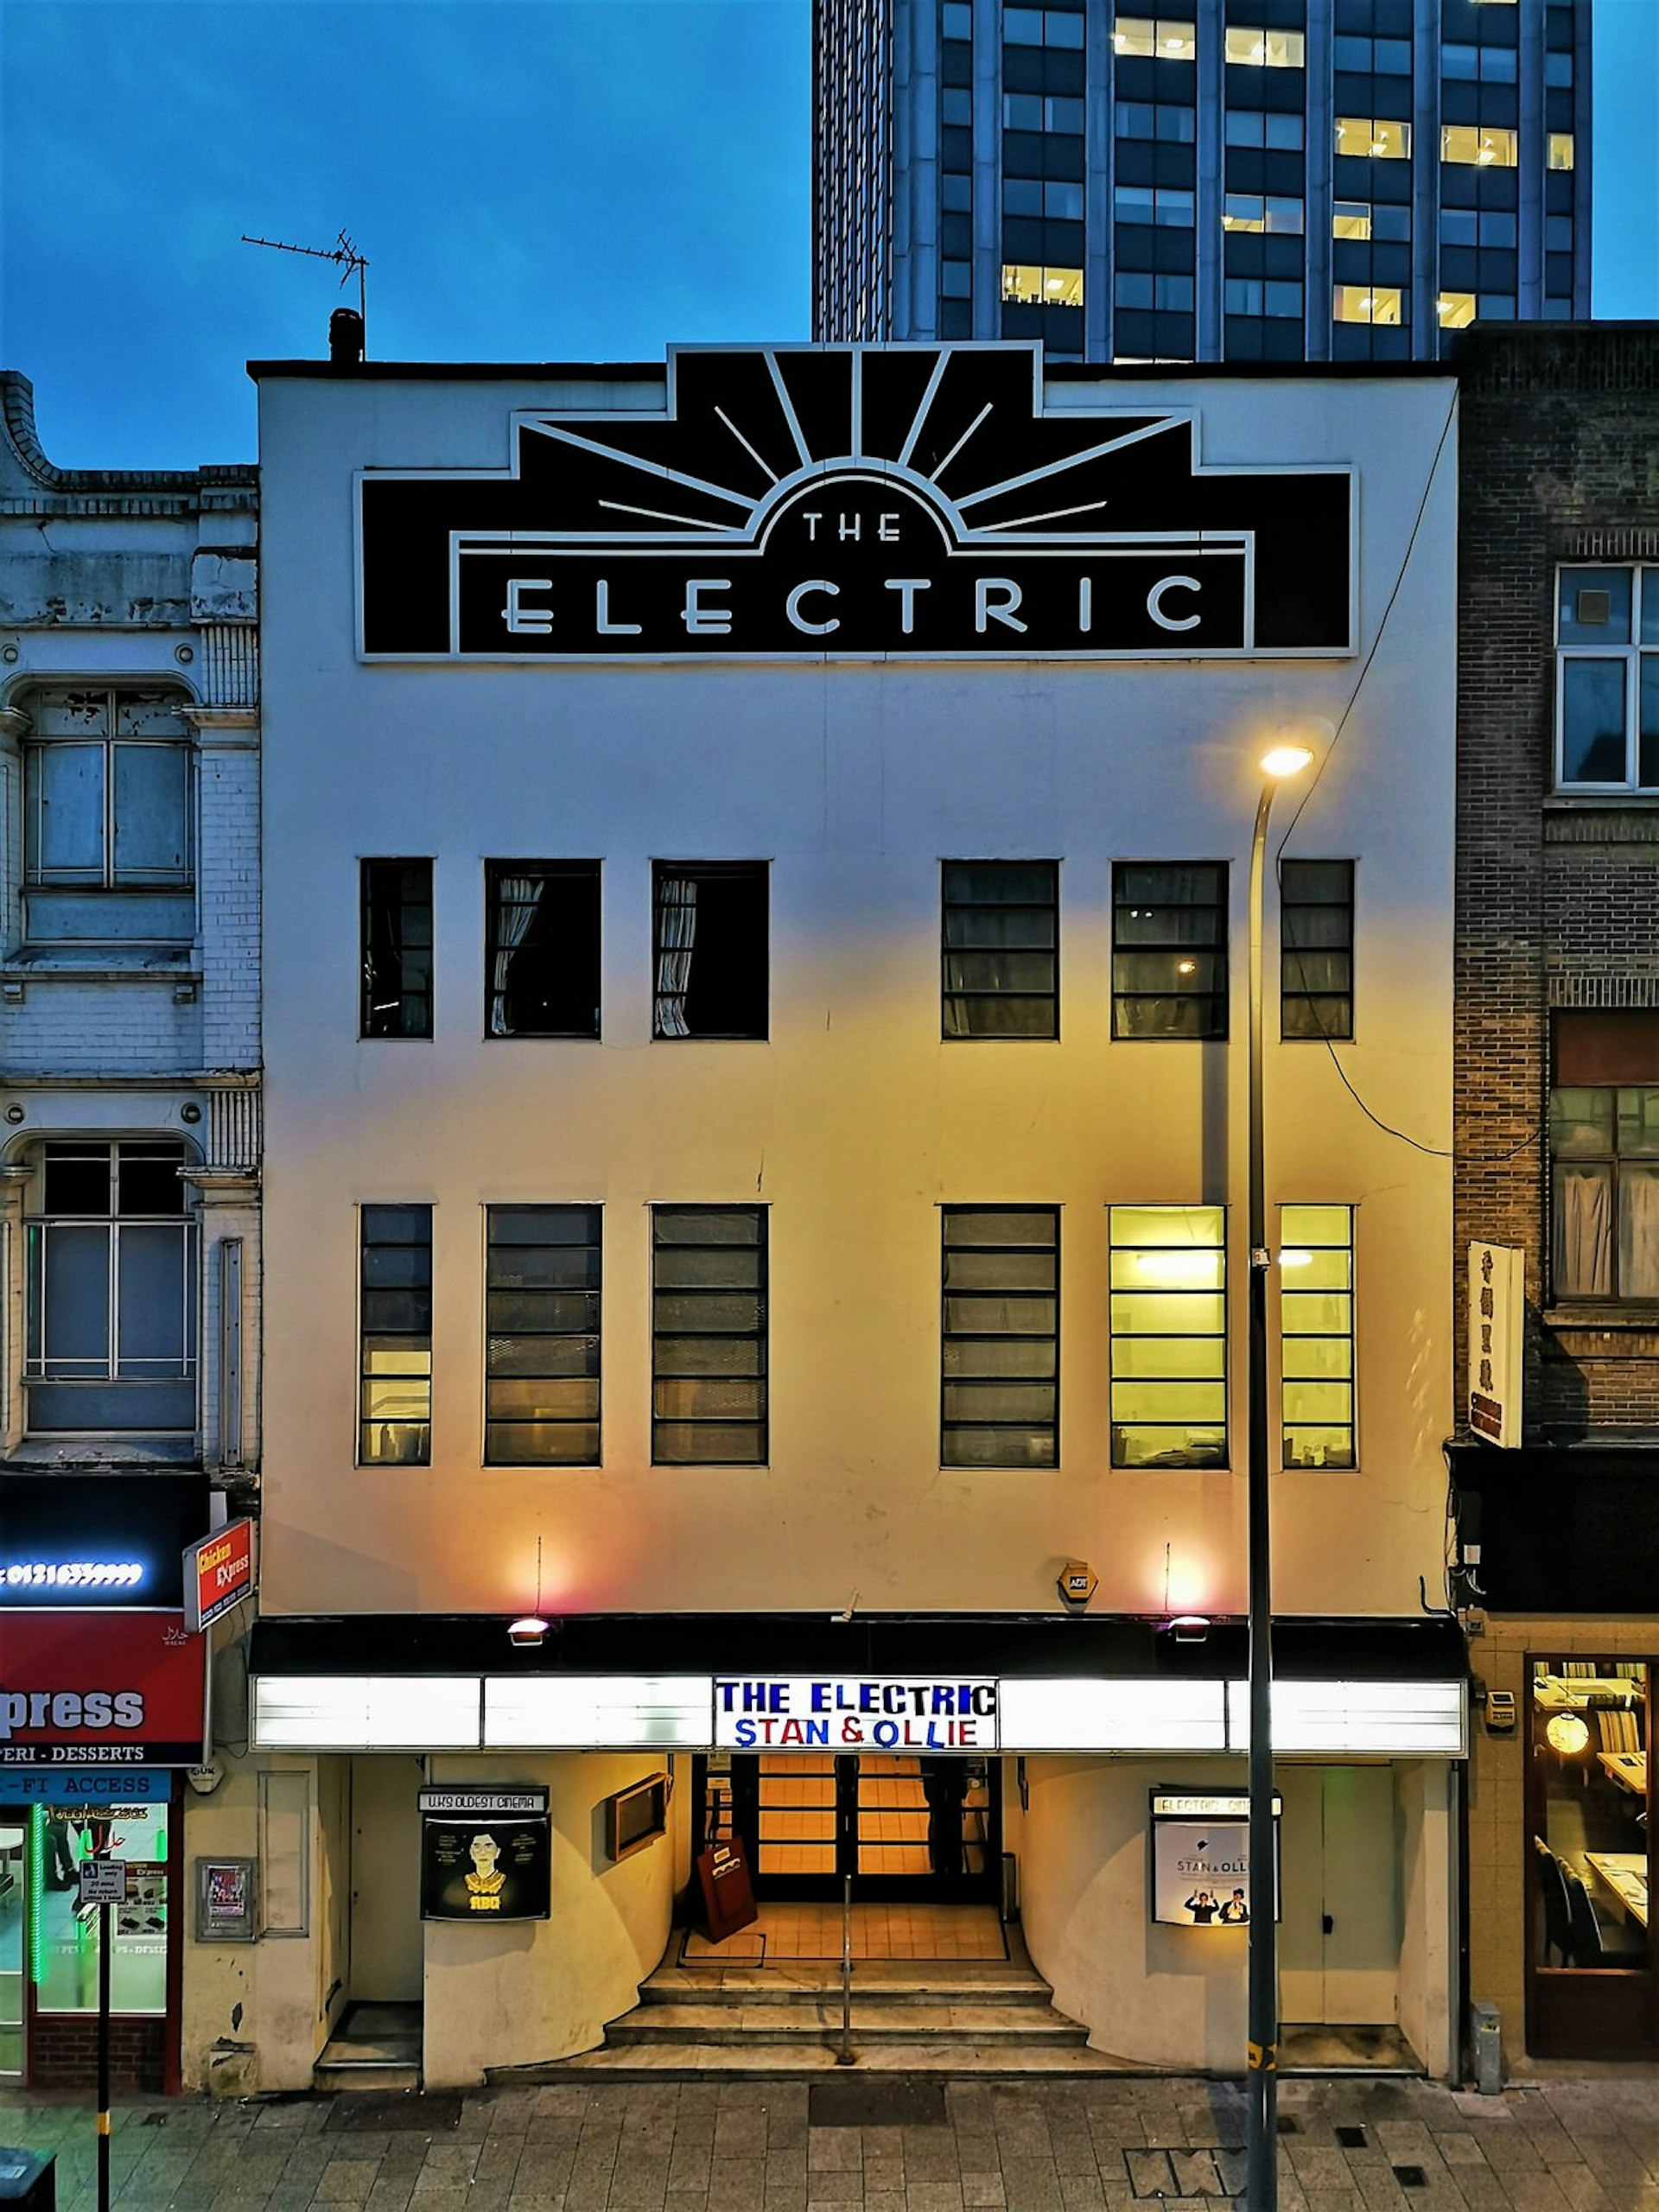 The exterior of The Electric cinema.